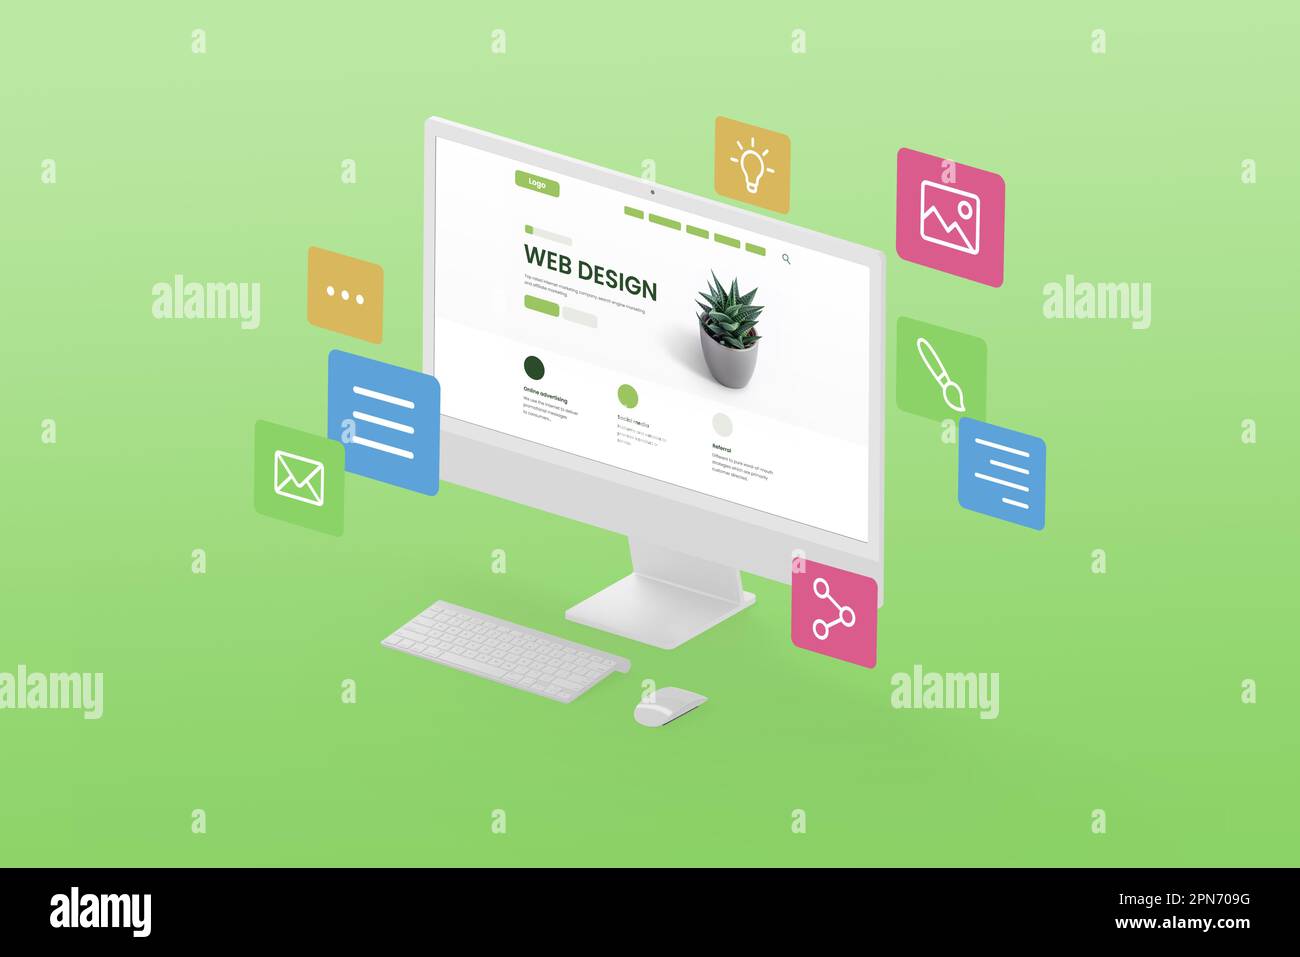 Designing a creative website concept. Display in isometric position with web page modules flying around the display on a green background Stock Photo